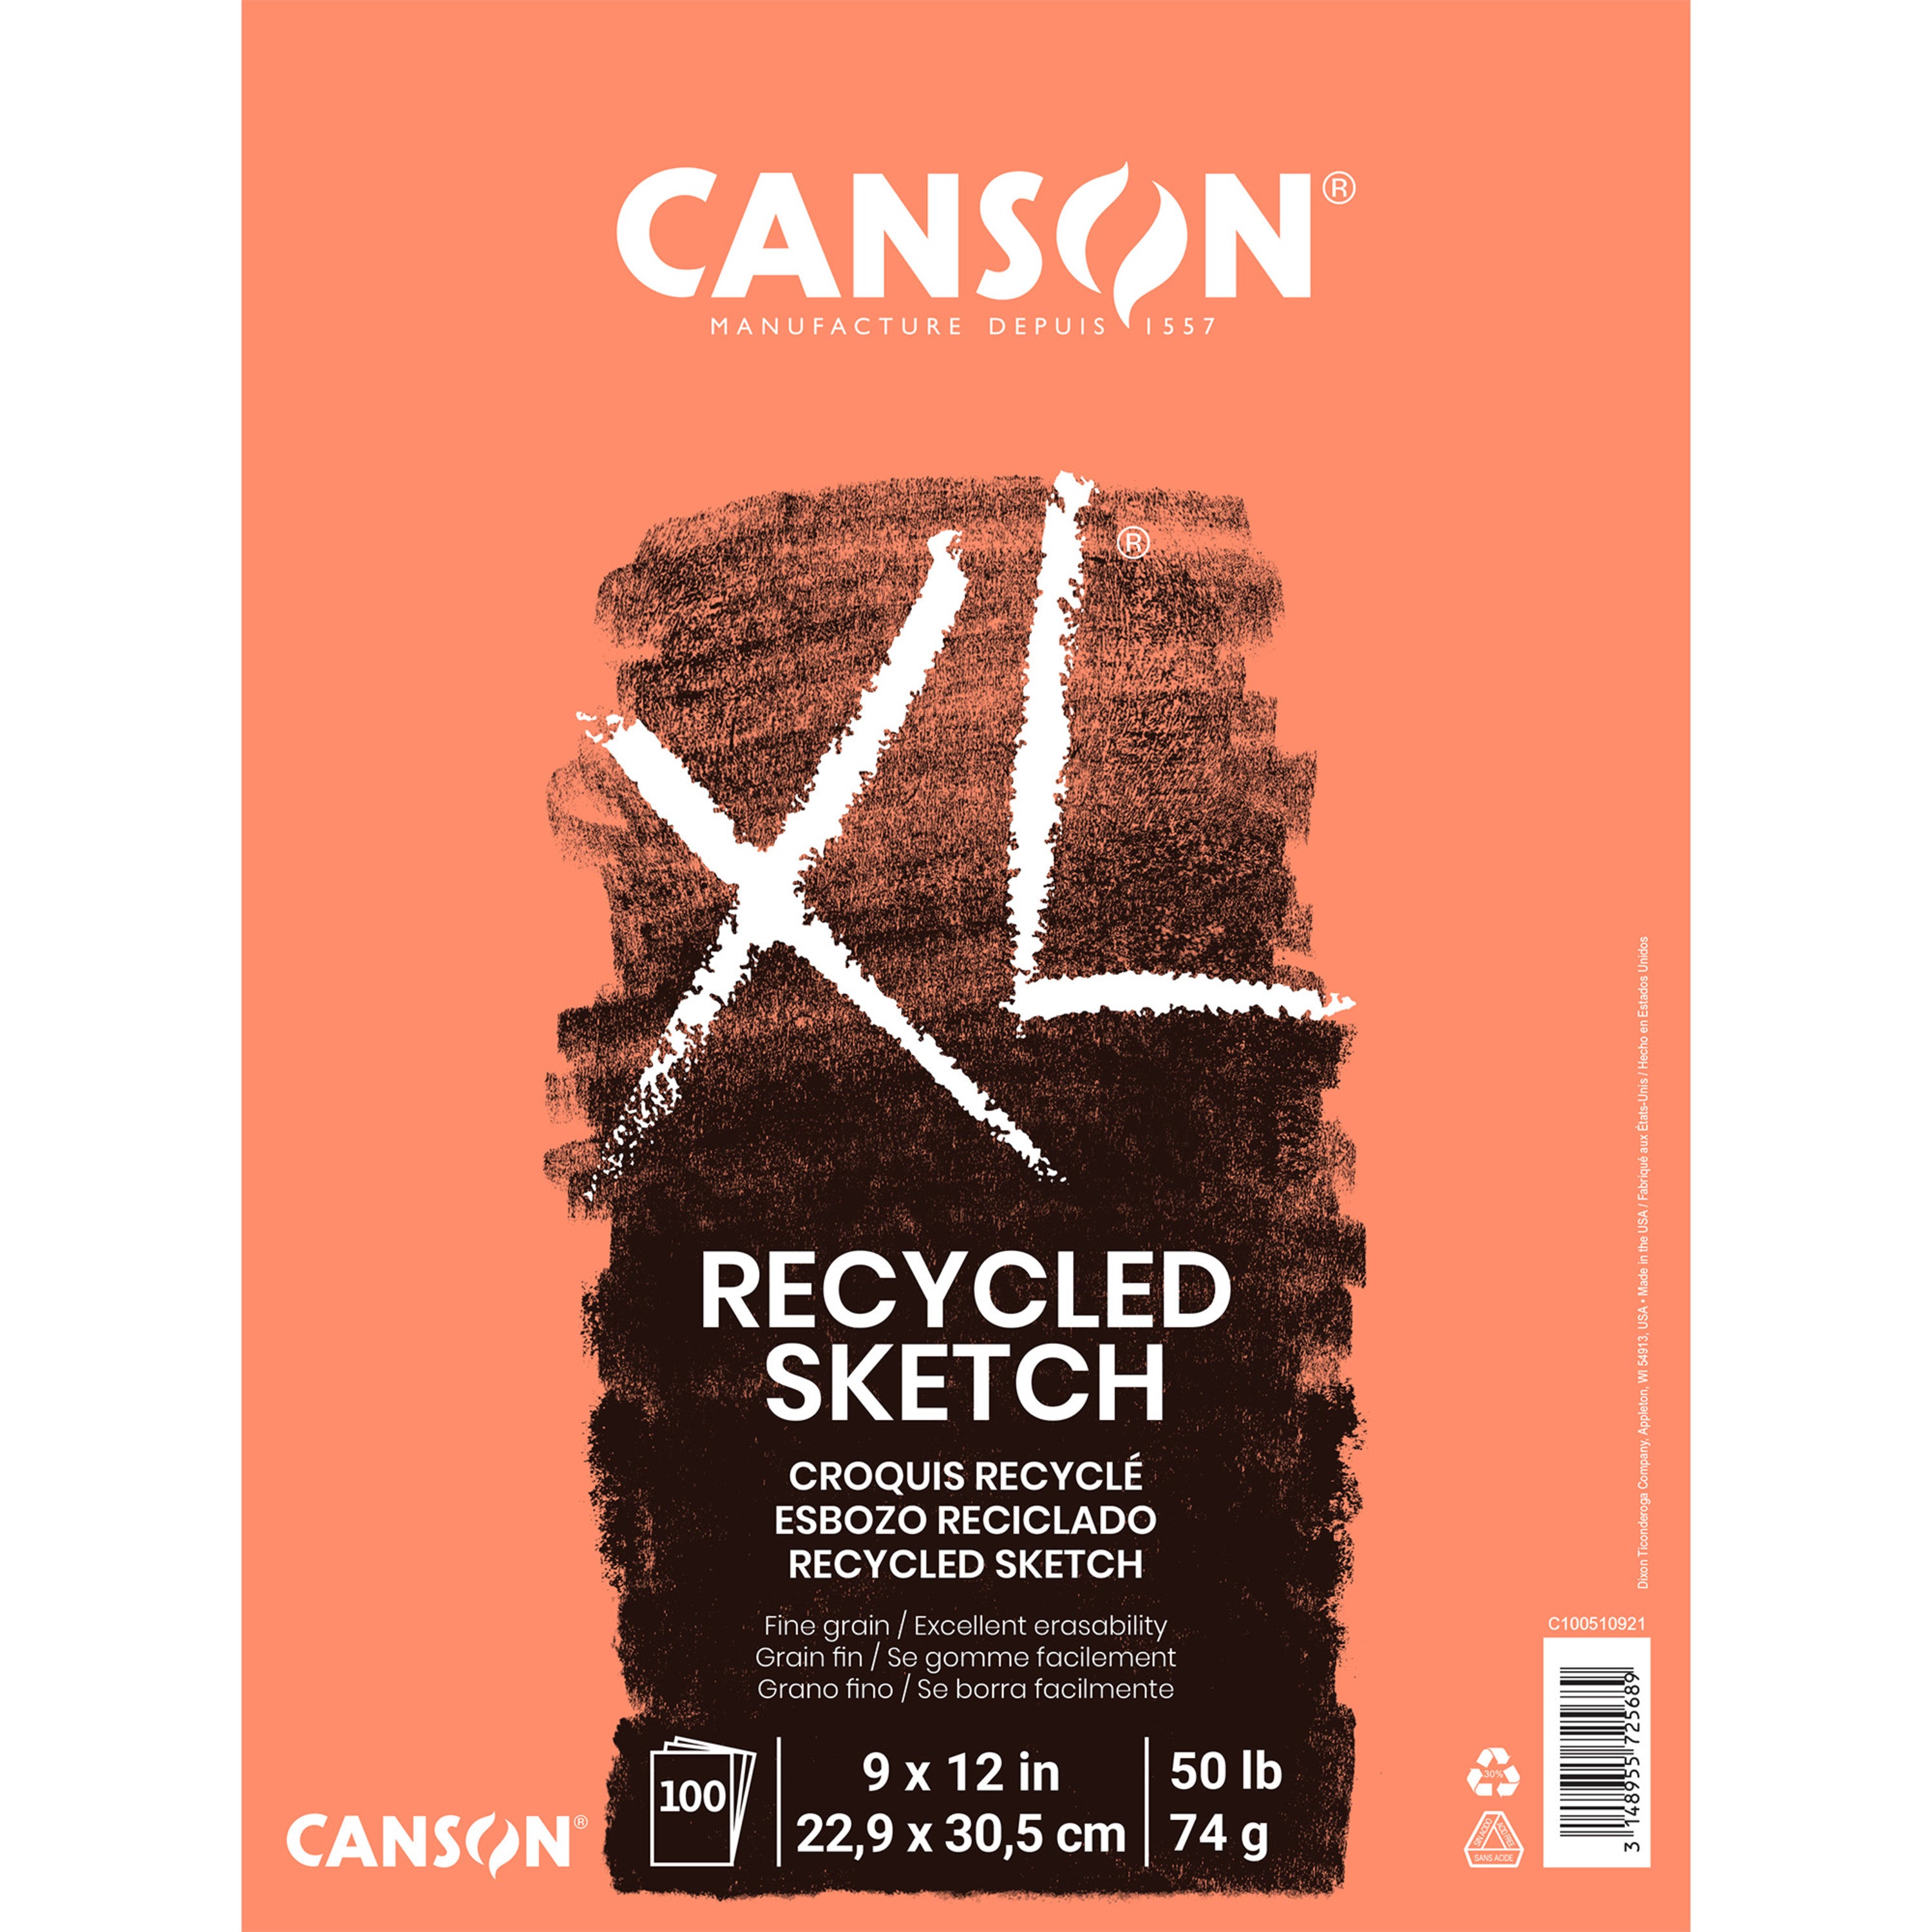 Canson Classic Cream Drawing Pad, 18 x 24, 24 Sheets